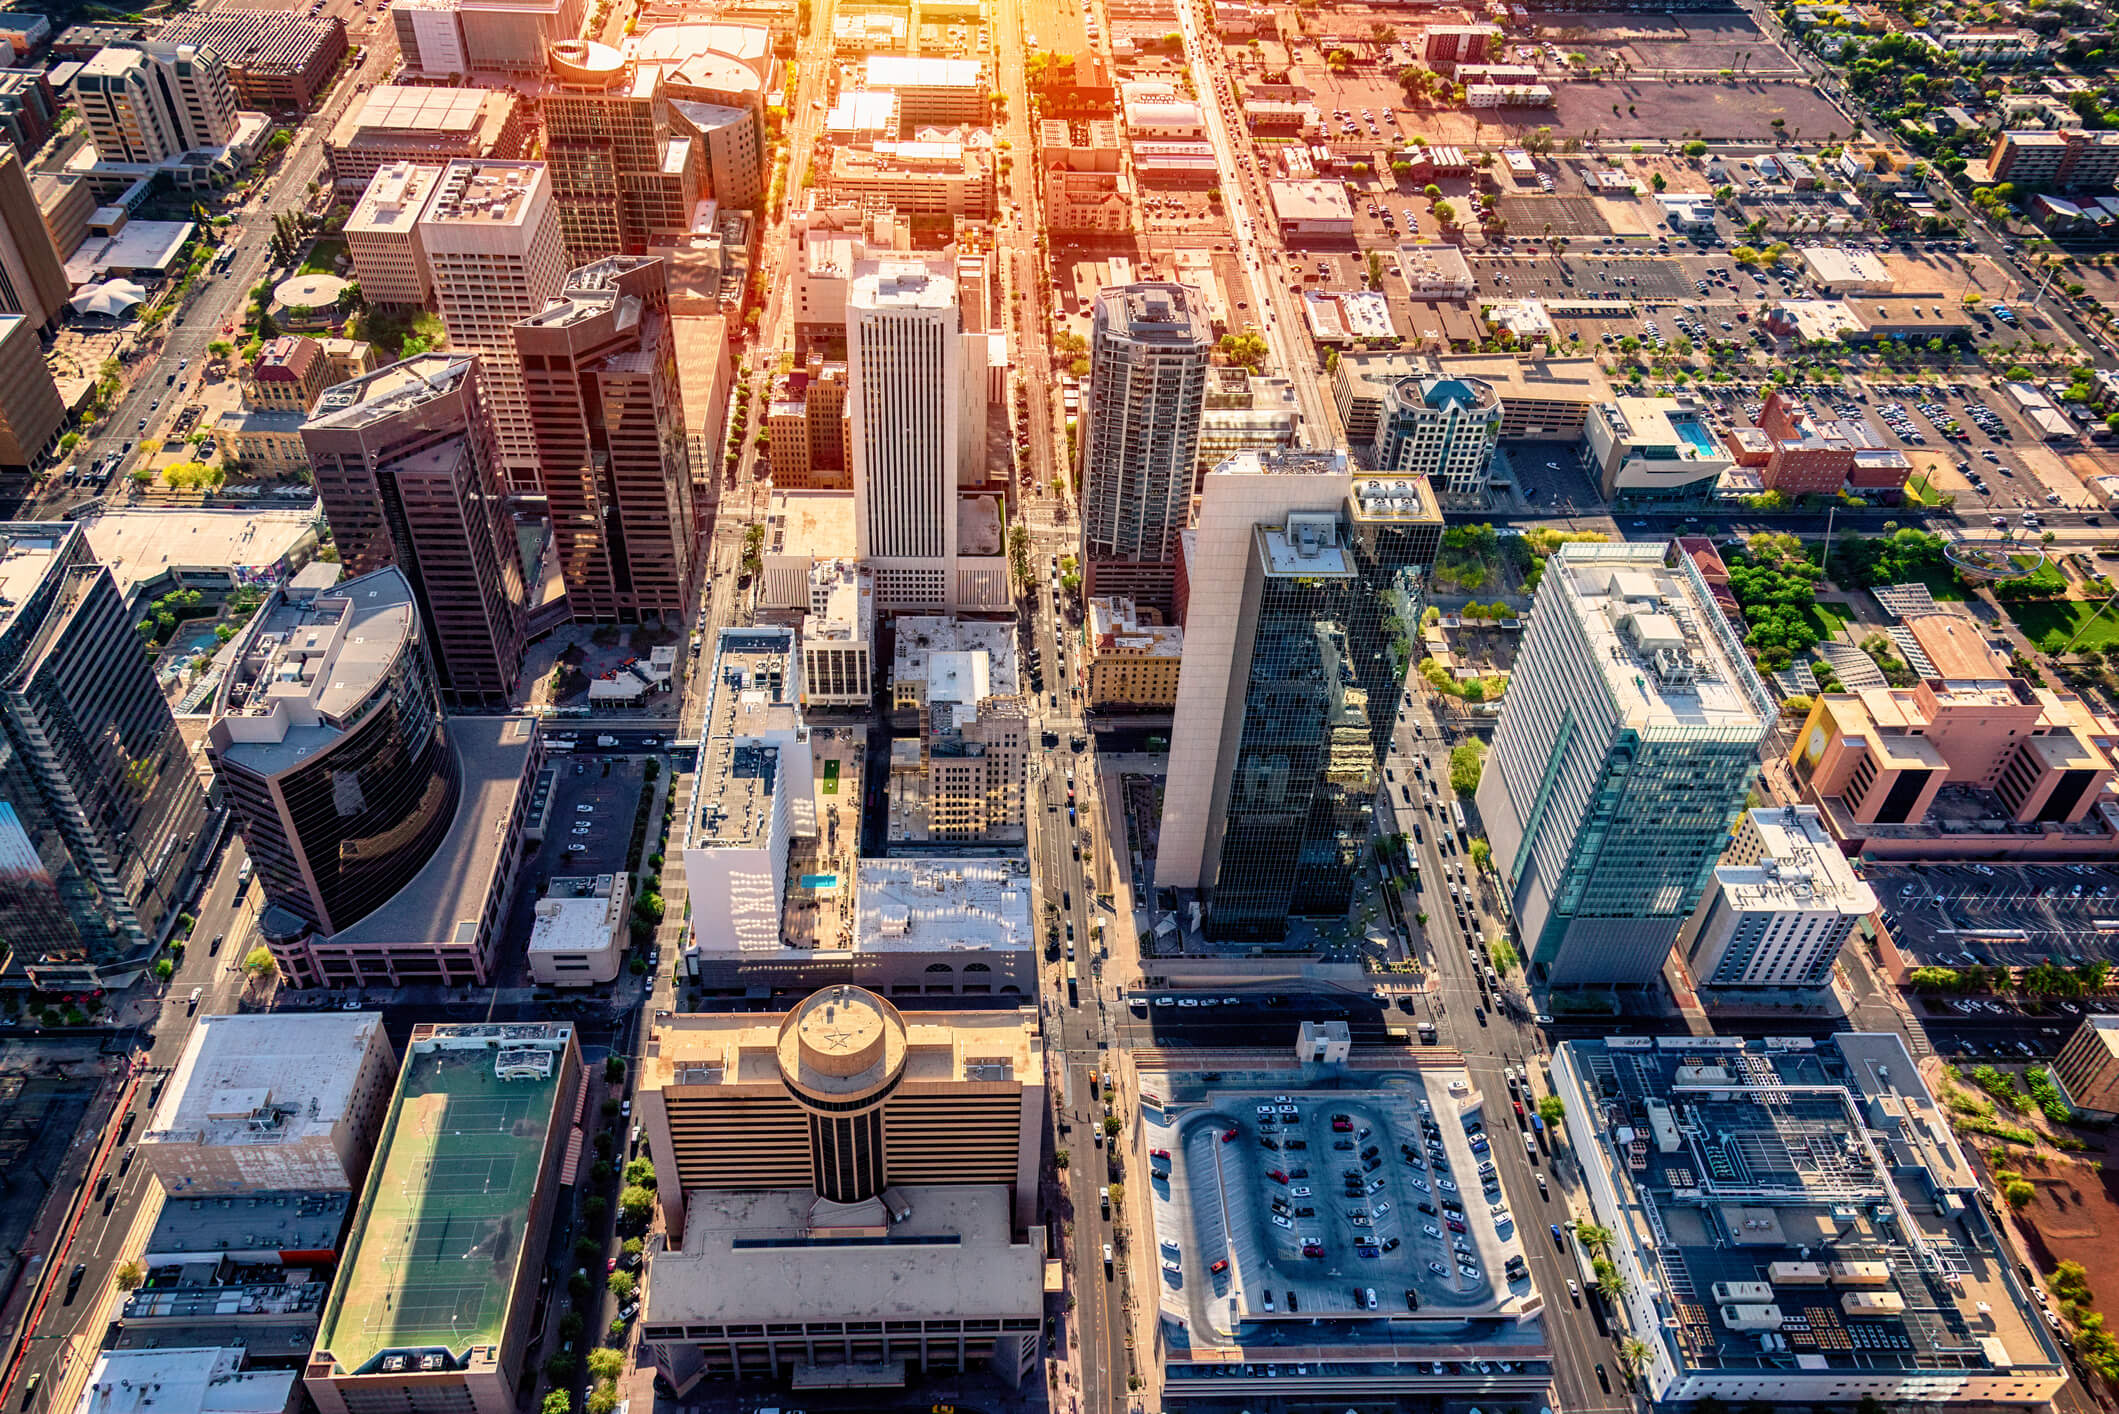 An aerial view of downtown Phoenix, Arizona and the surrounding urban area shot from a helicopter nearing dusk.